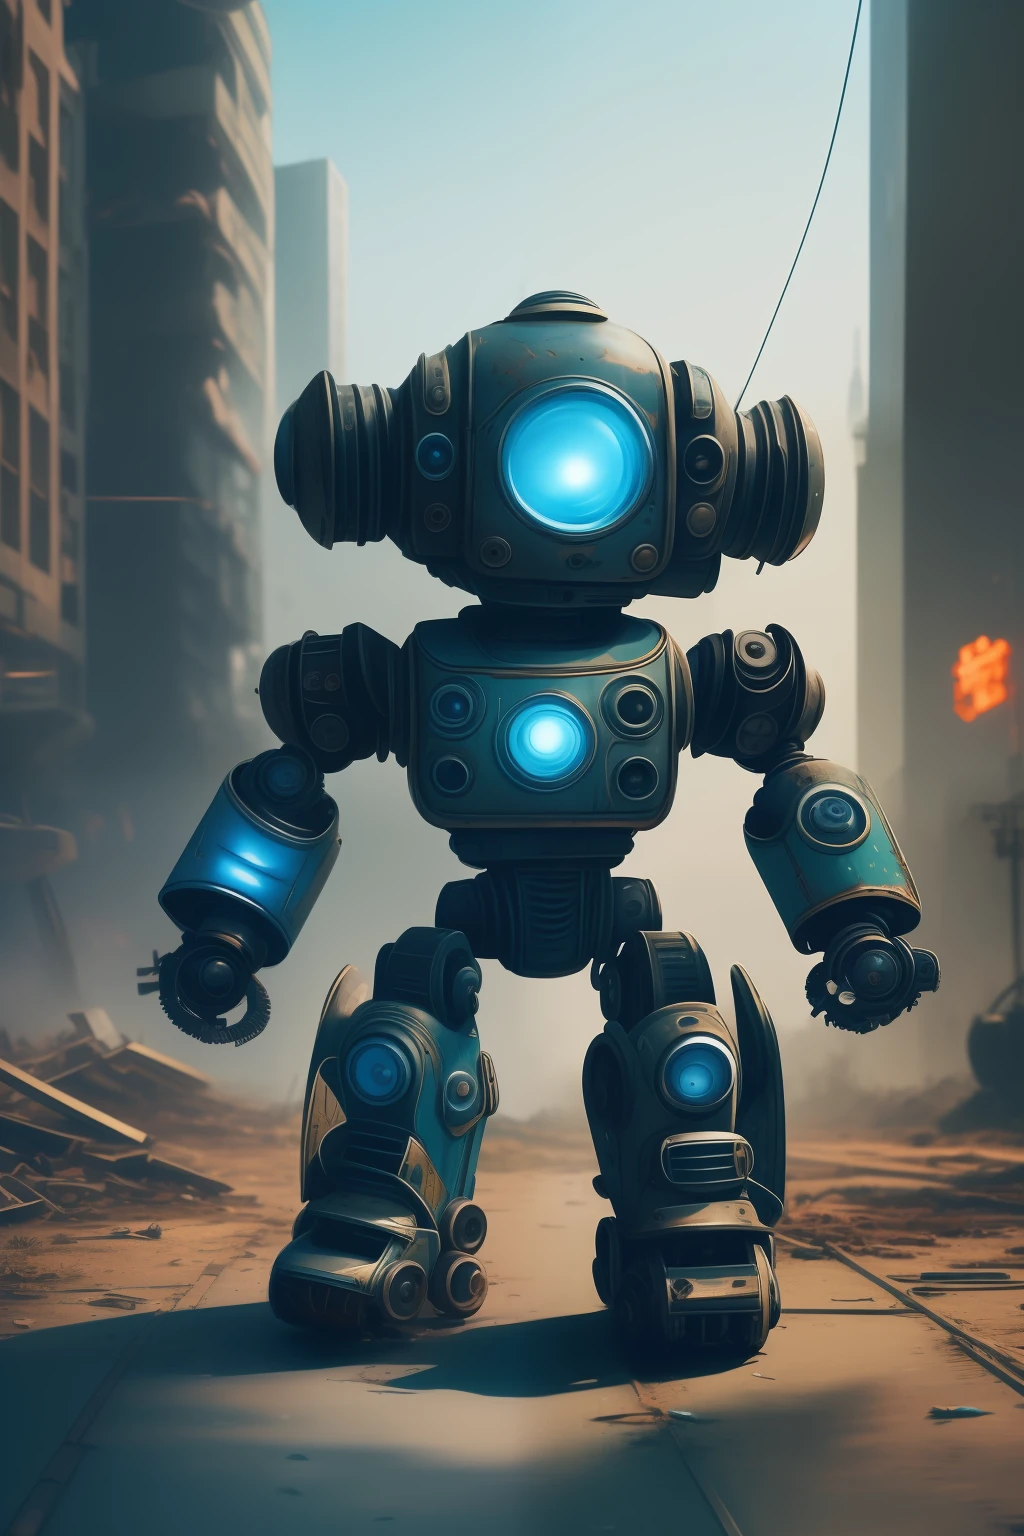 beautifully detailed background, detailed background, small robot in overgrown city, rollerblade on feet, action pose, blue robot, cute, professional artwork, fallout, post apocalyptic, ruined buildings, wreckage, rust, cute robot, fun mood, retro style robot, old fridge, led screen face